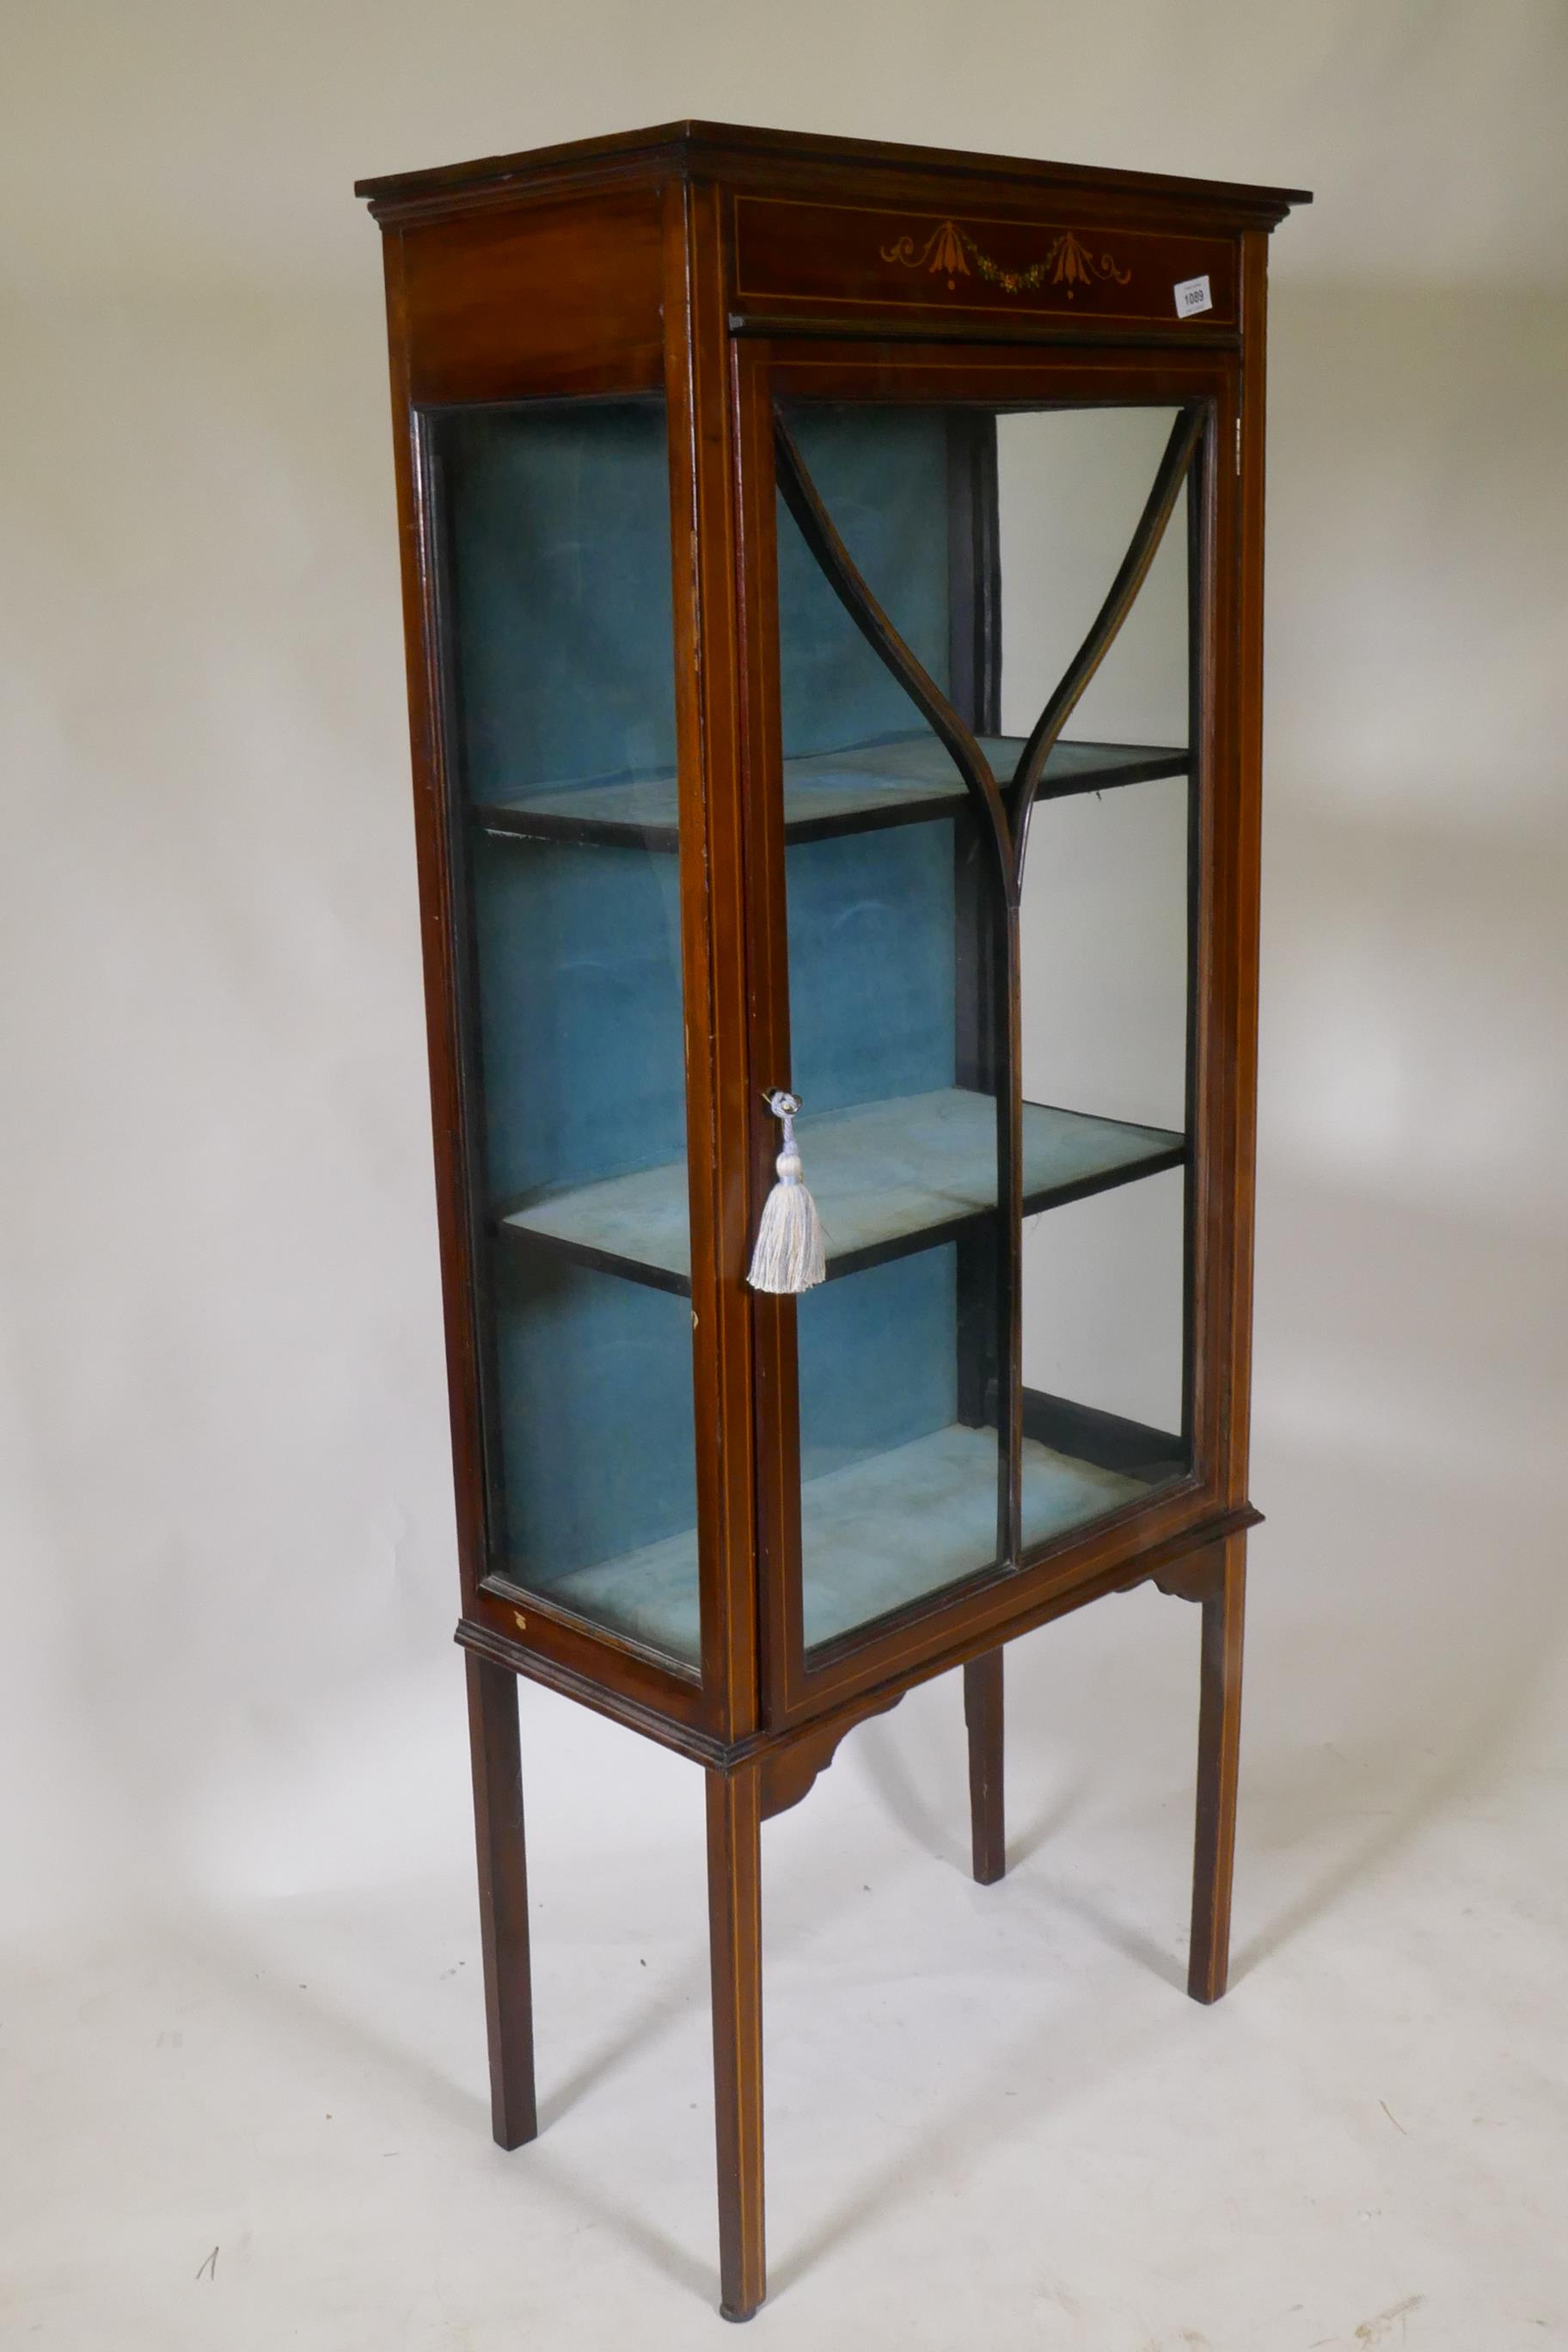 An Edwardian inlaid mahogany display cabinet with painted decoration and single glazed door, - Image 3 of 3